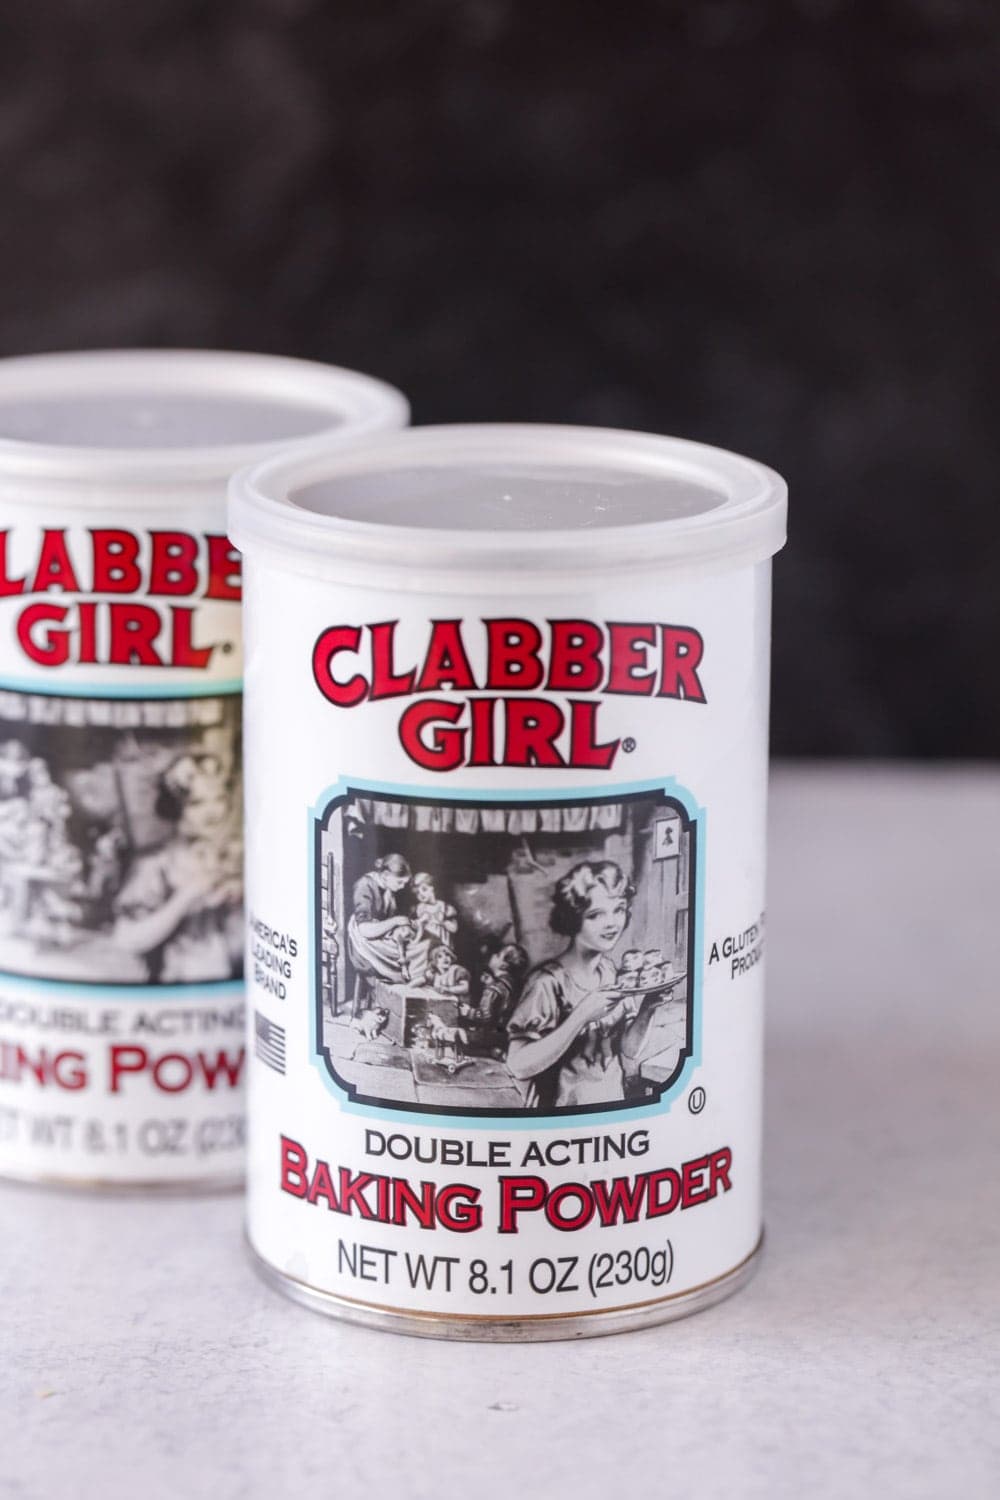 Baking powder substitutes-5 best choices